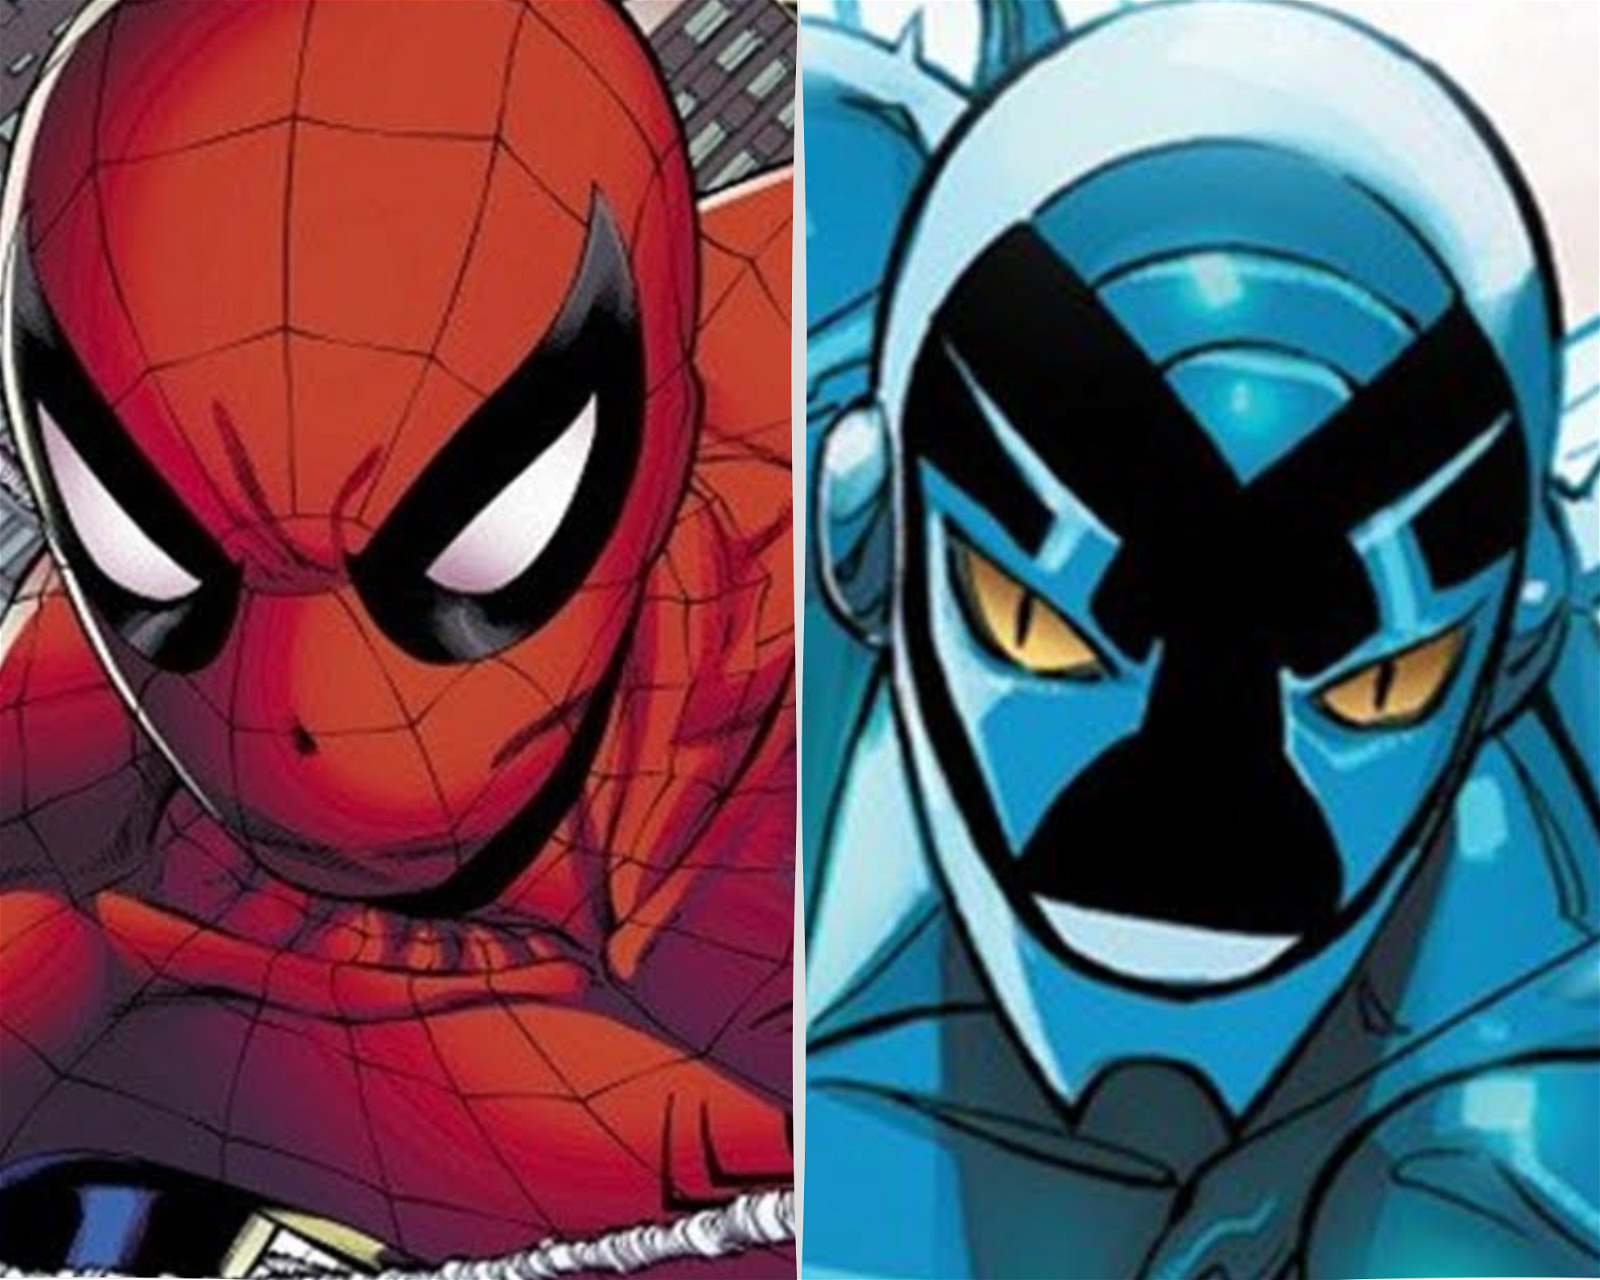 Fans claim Blue Beetle is a copy of Spider-Man